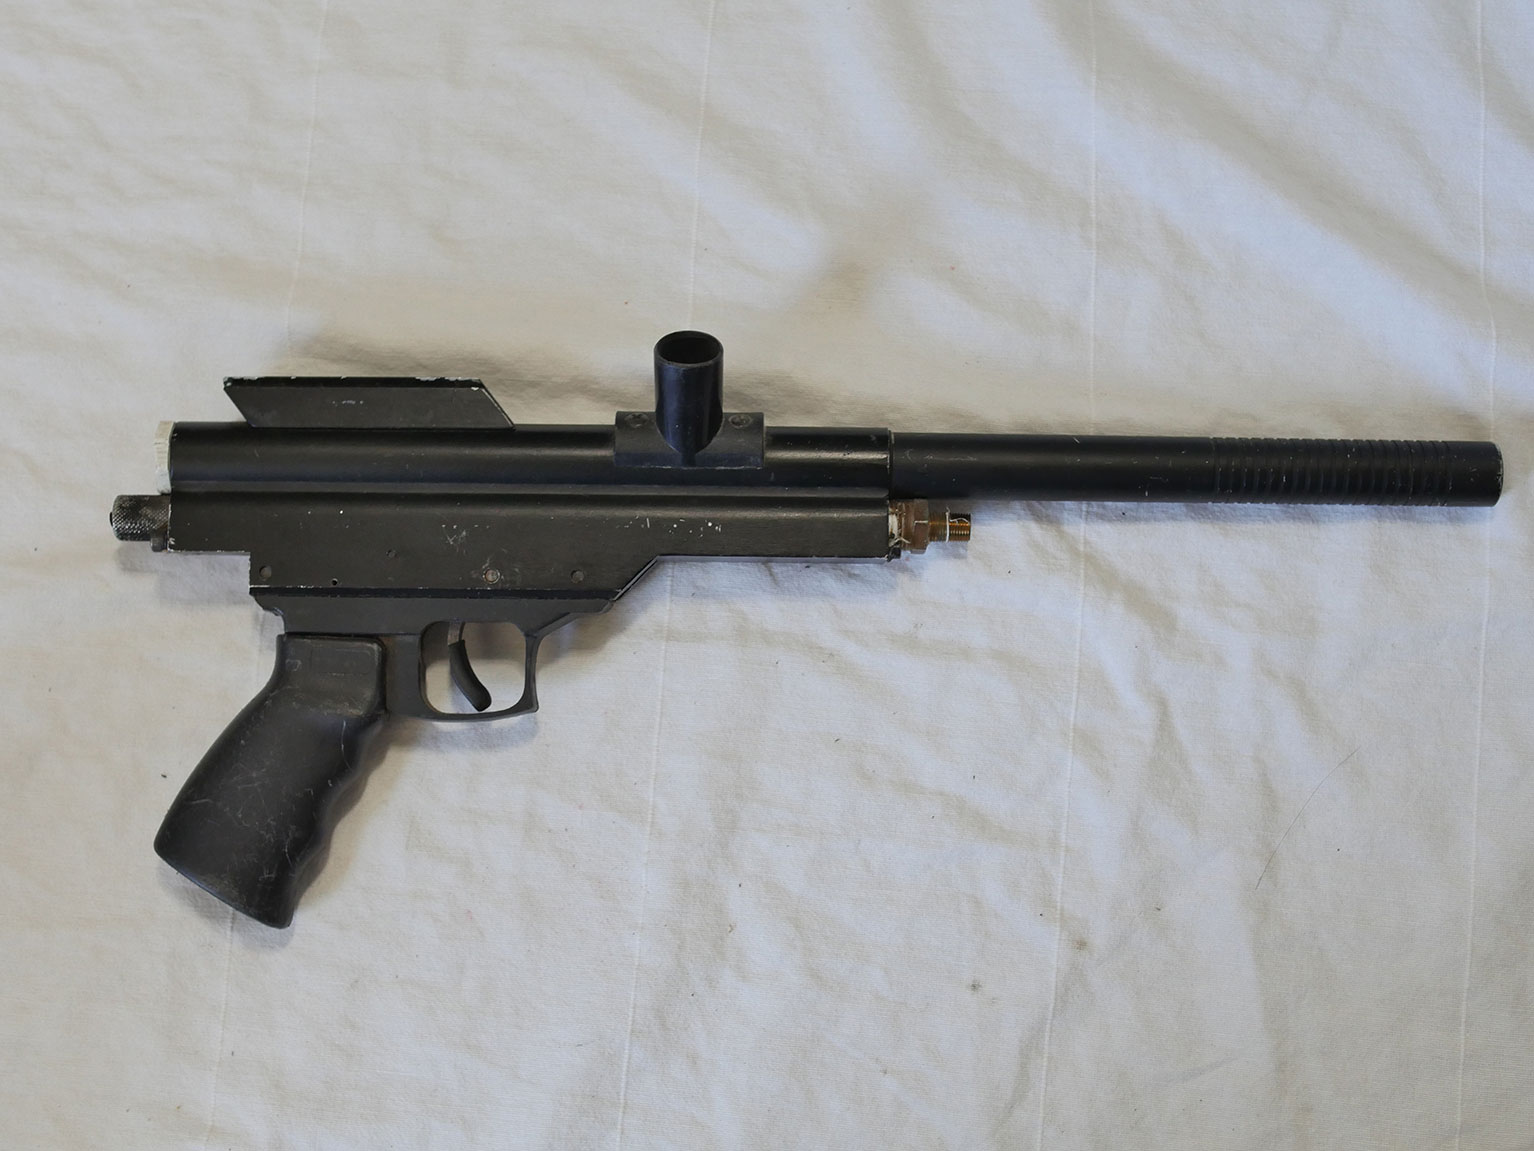 Brute a matic project gun, bad shape, doesn't work and could be missing parts